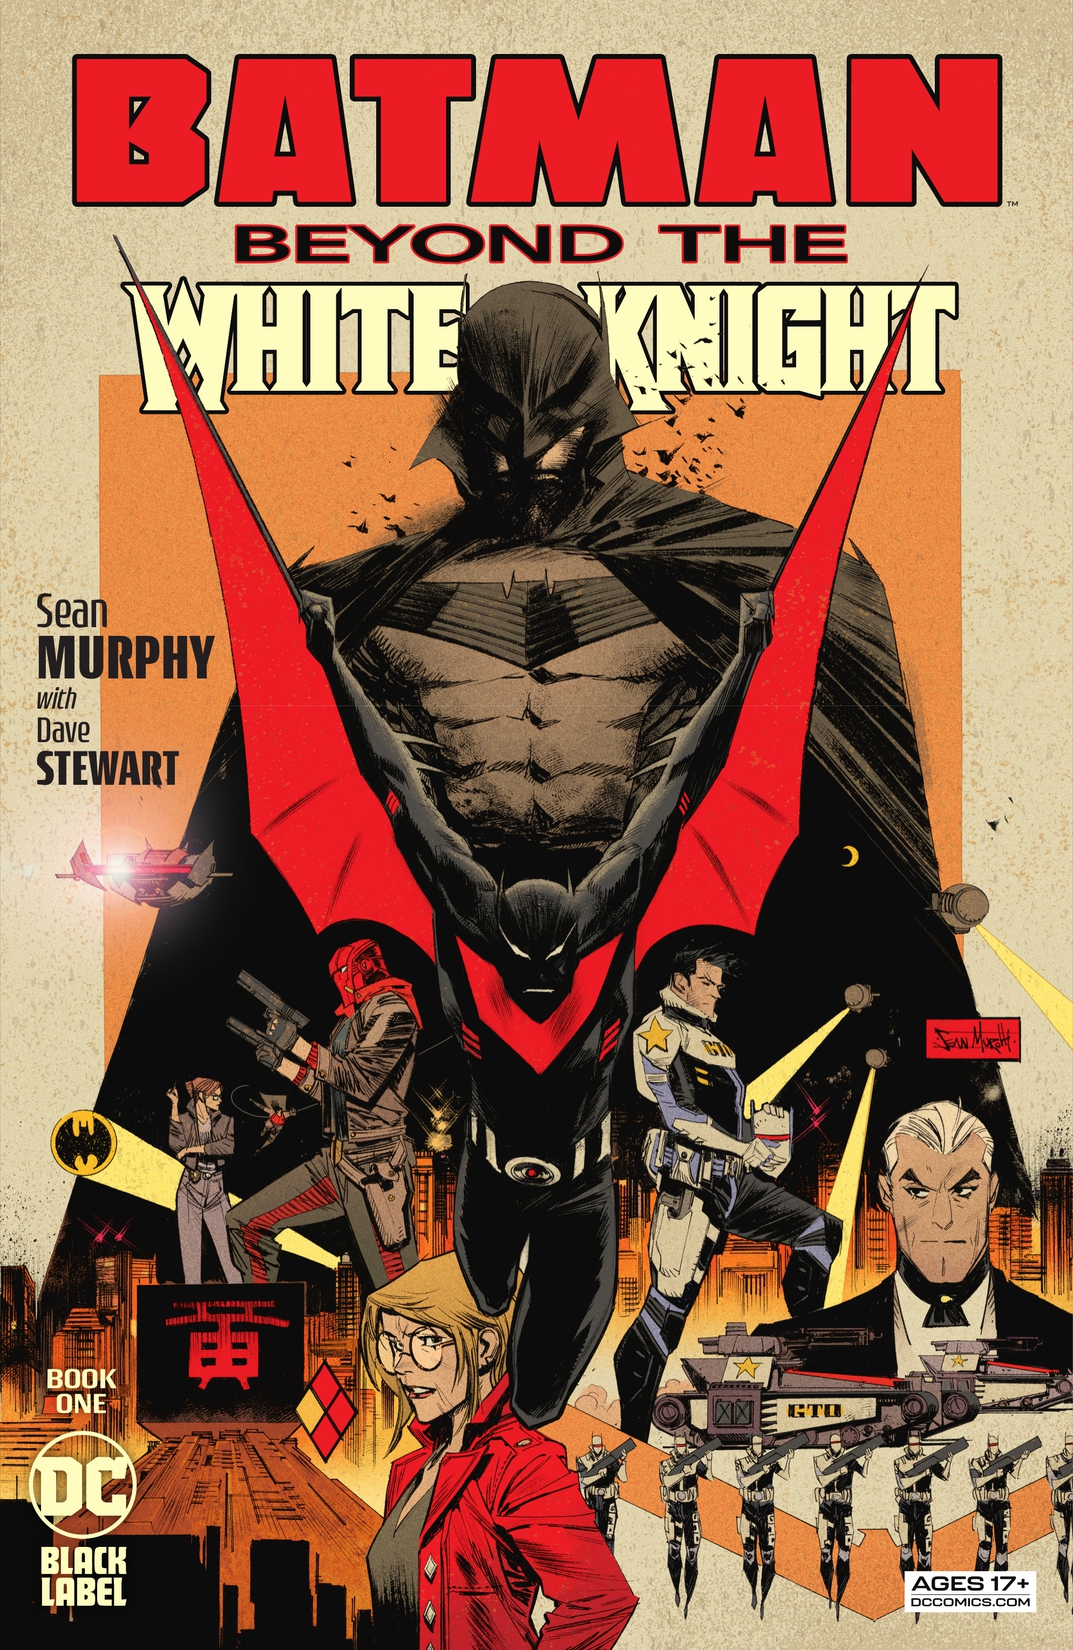 Batman: Beyond the White Knight #1 preview images